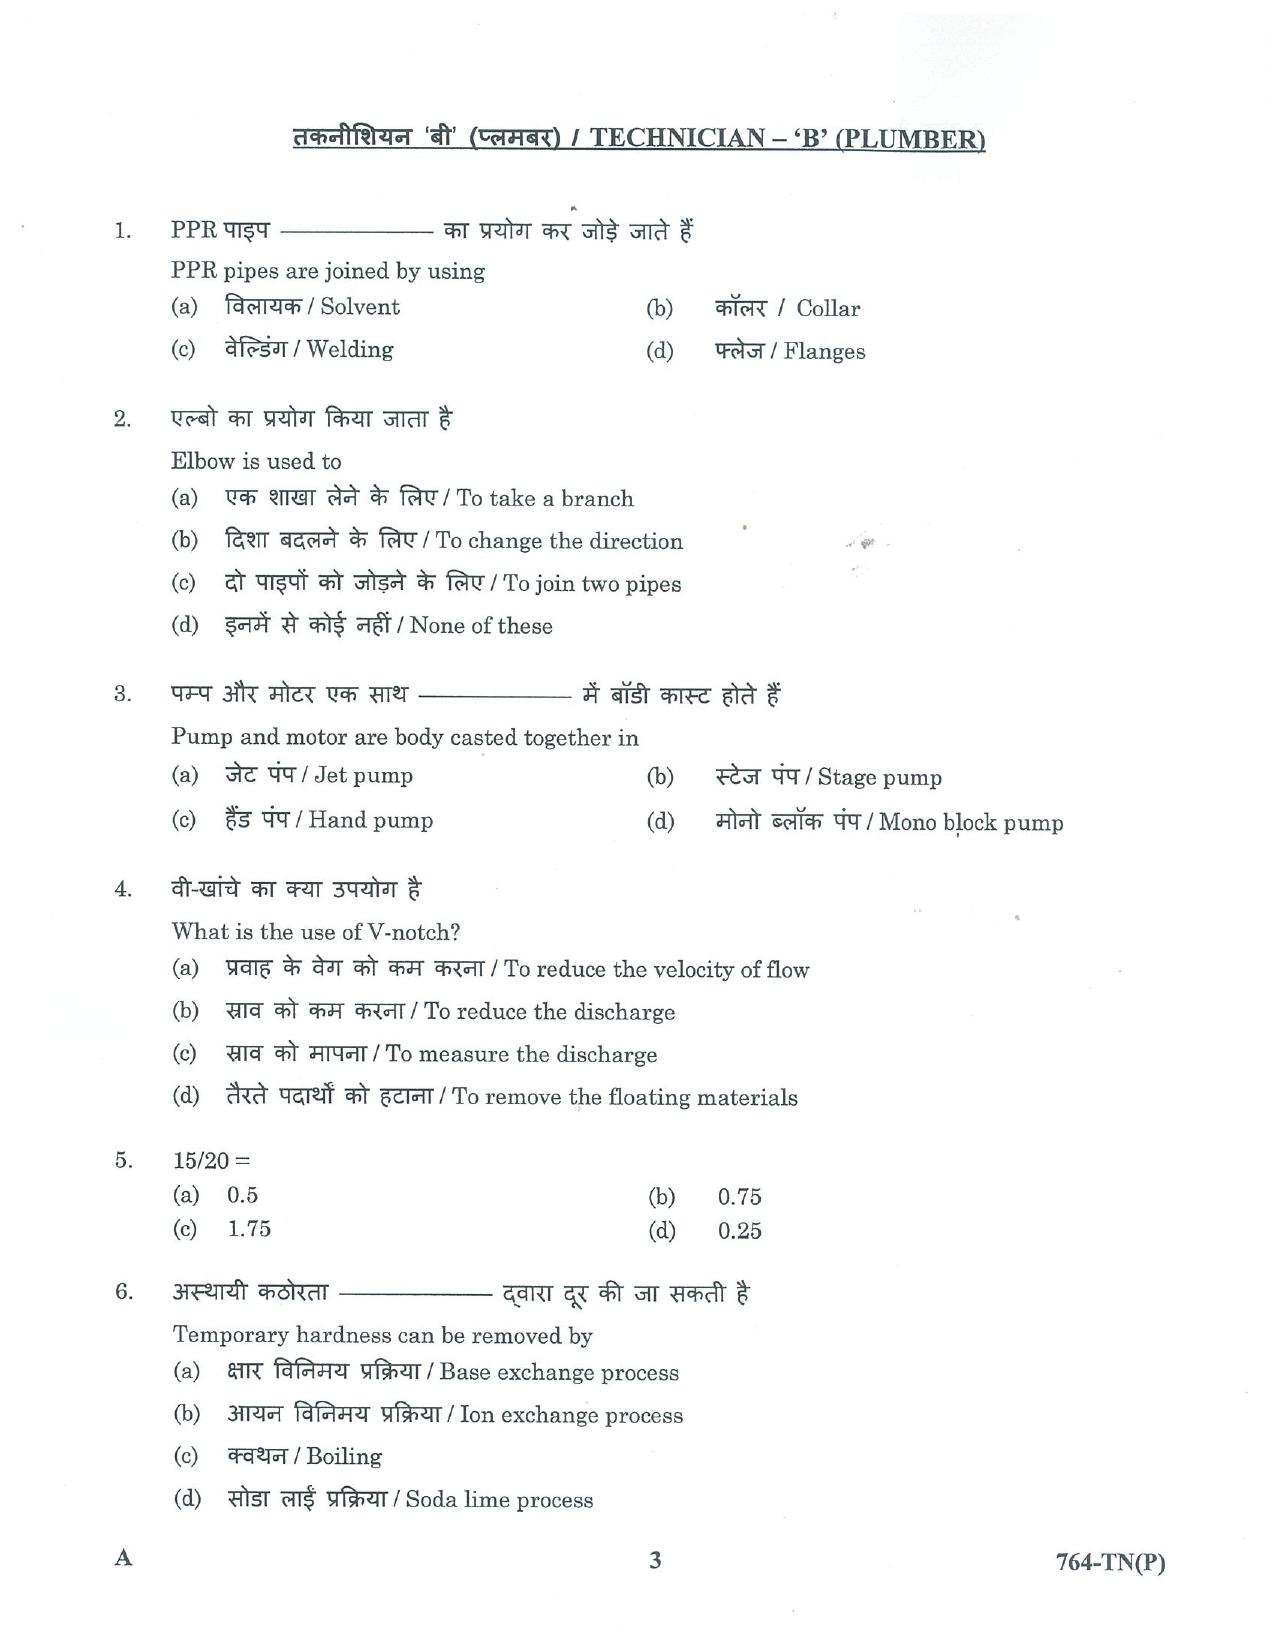 LPSC Technician ‘B’ (Plumber) 2023 Question Paper - Page 3